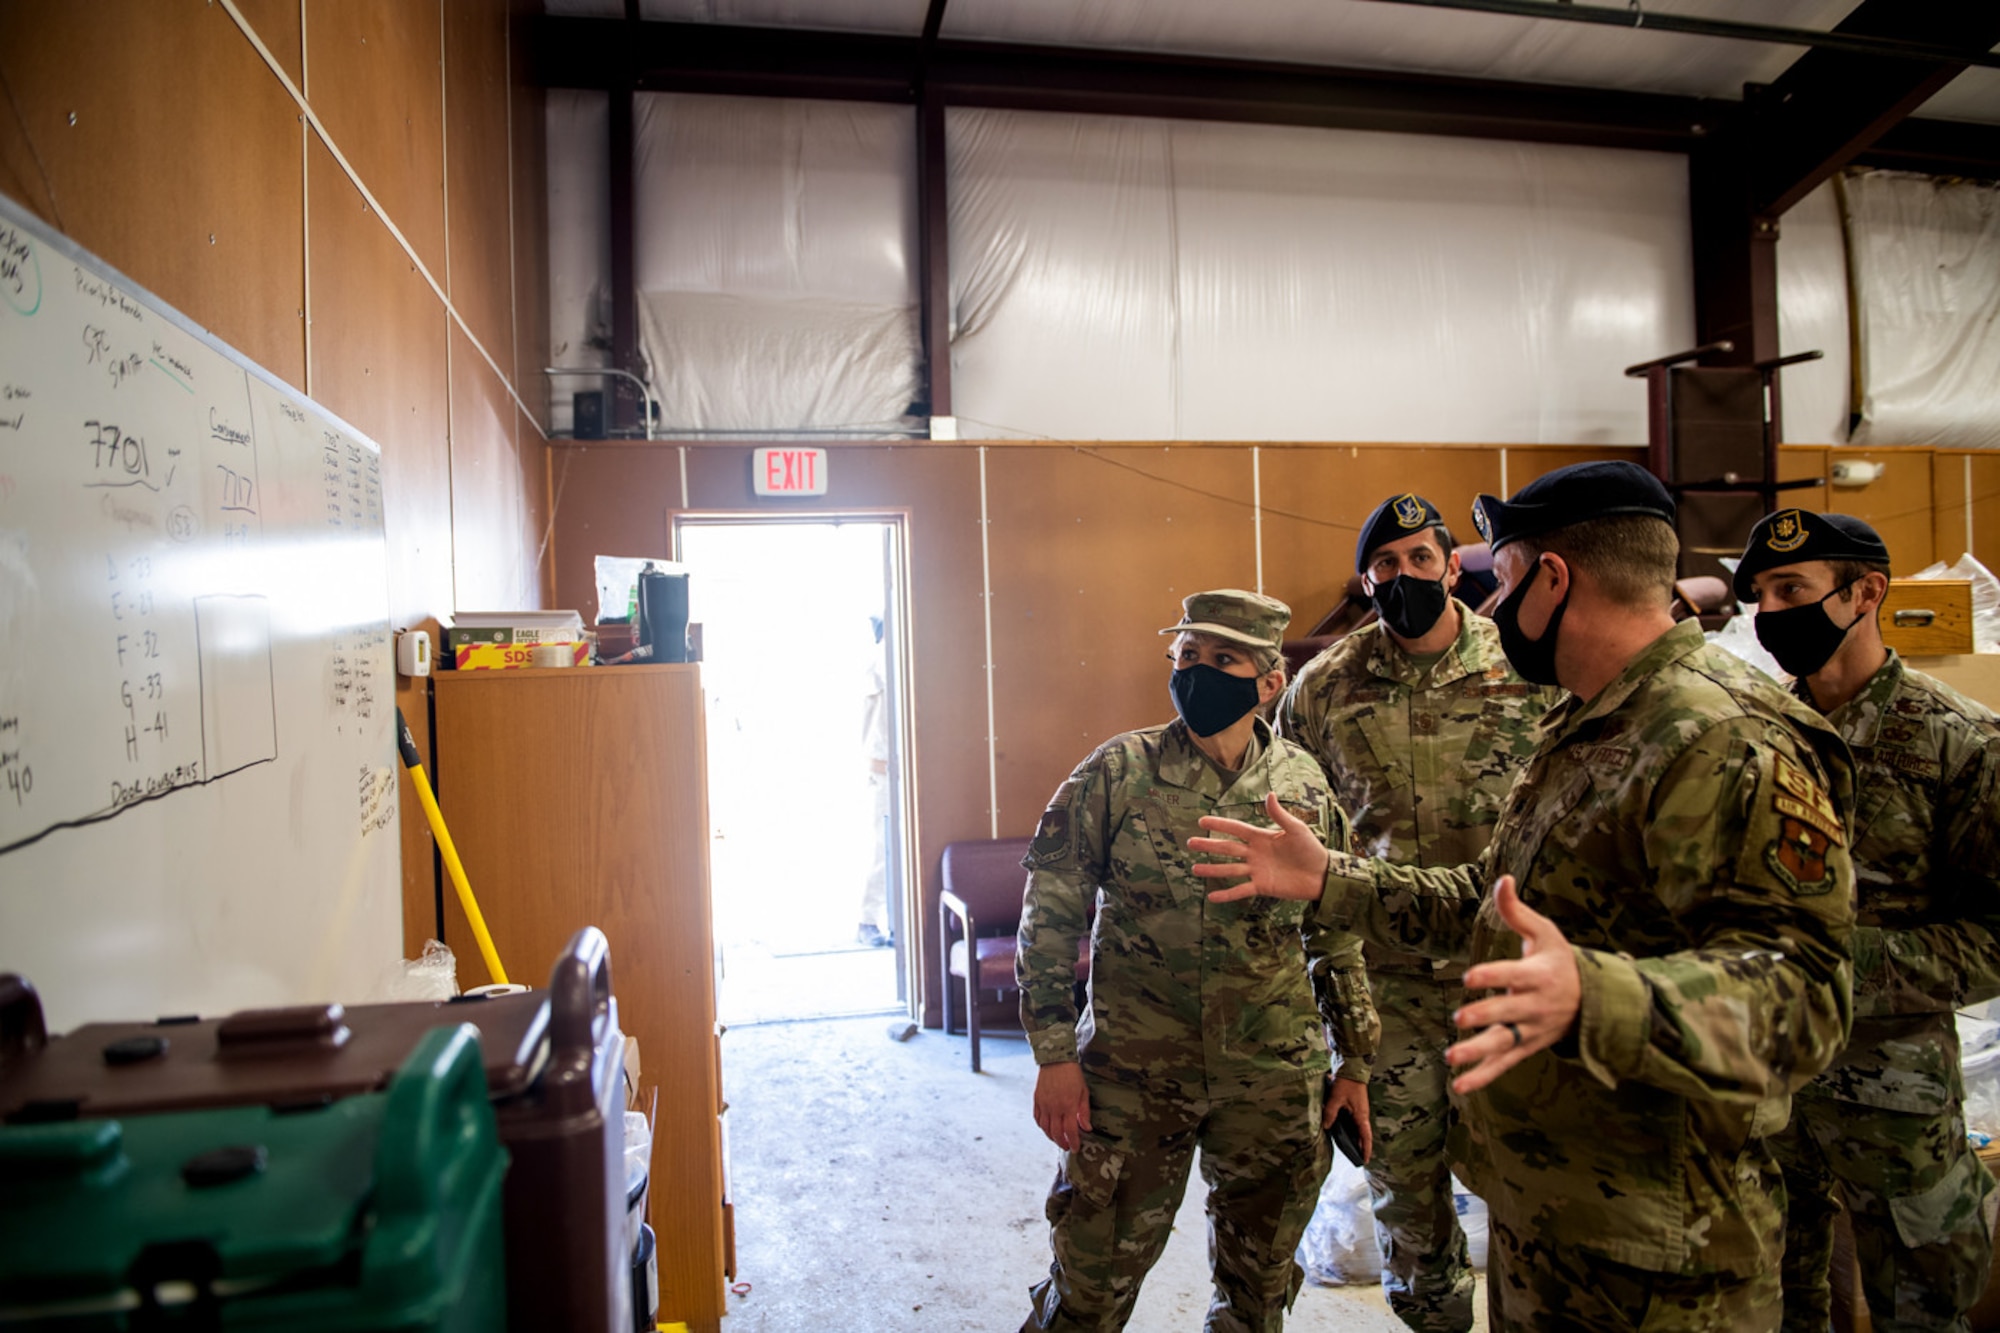 U.S. Air Force Brig. Gen. Caroline Miller (left), 502nd Air Base Wing and Joint Base San Antonio commander, receives a tour from Lt. Col. Mathew Kowalski (right), 341st Training Squadron commander, of where K-9 were stored during the cold weather Feb. 19, 2021, at Joint Base San Antonio, Texas.